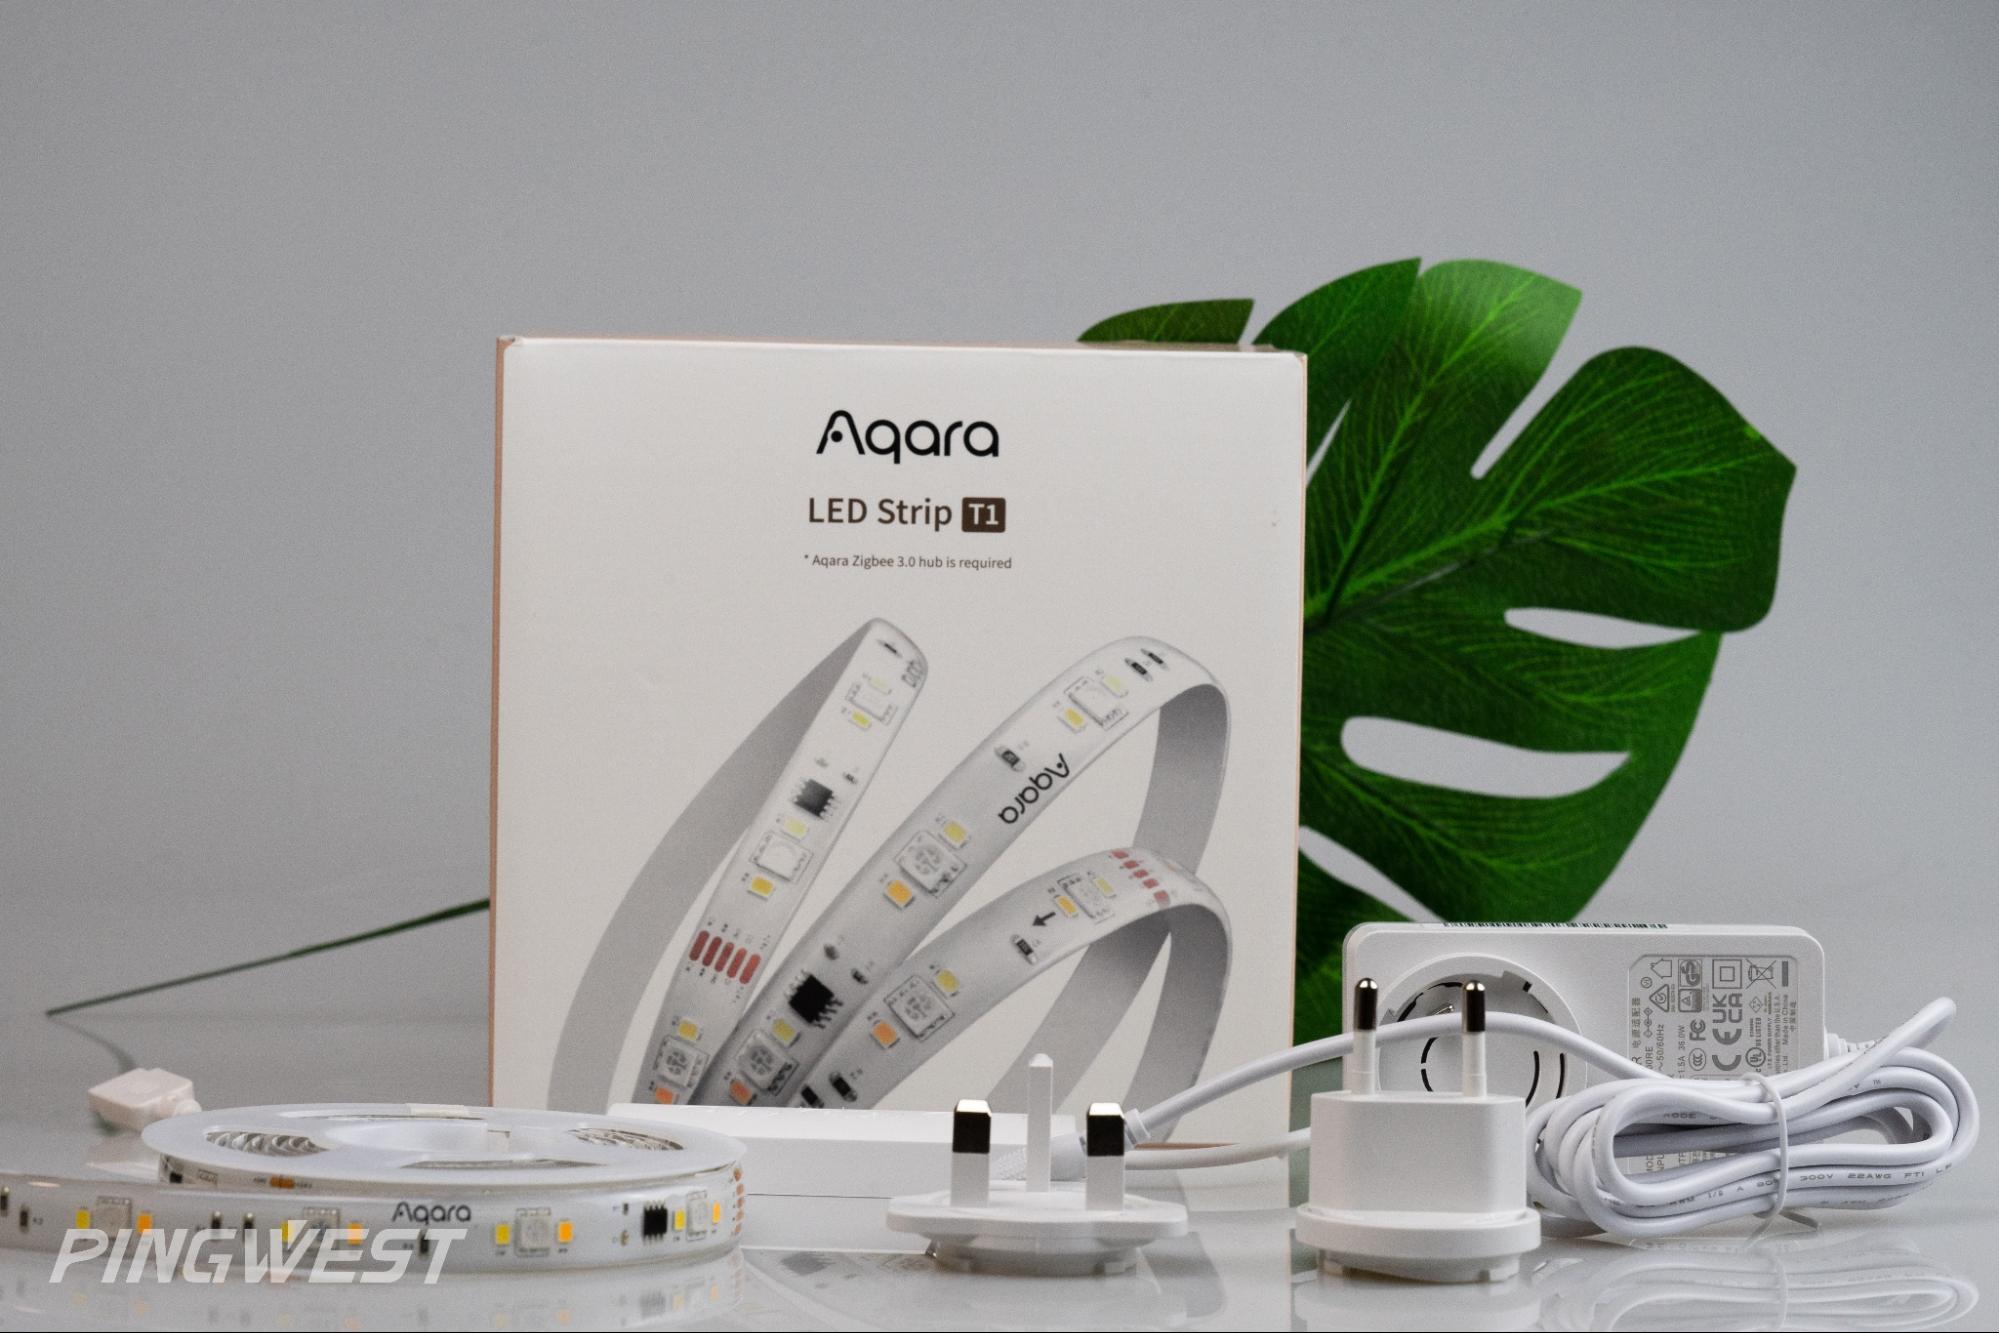 Aqara LED Strip T1 review: a home ambiance booster - PingWest